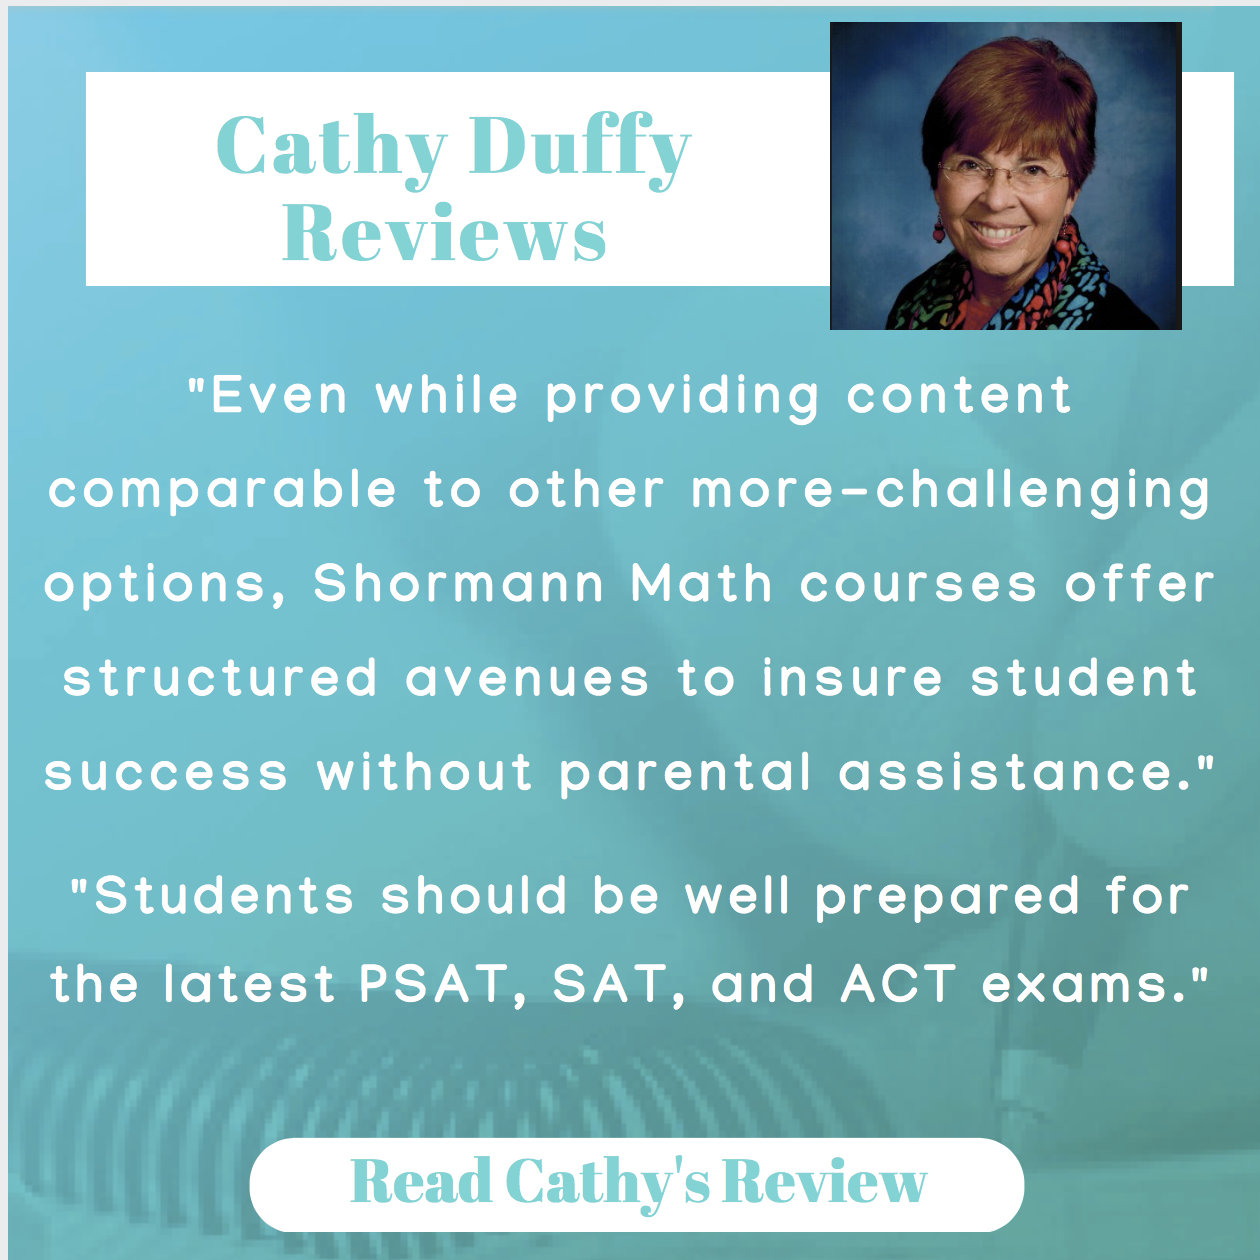 2018-ad-for-cathy-duffy-review-.png